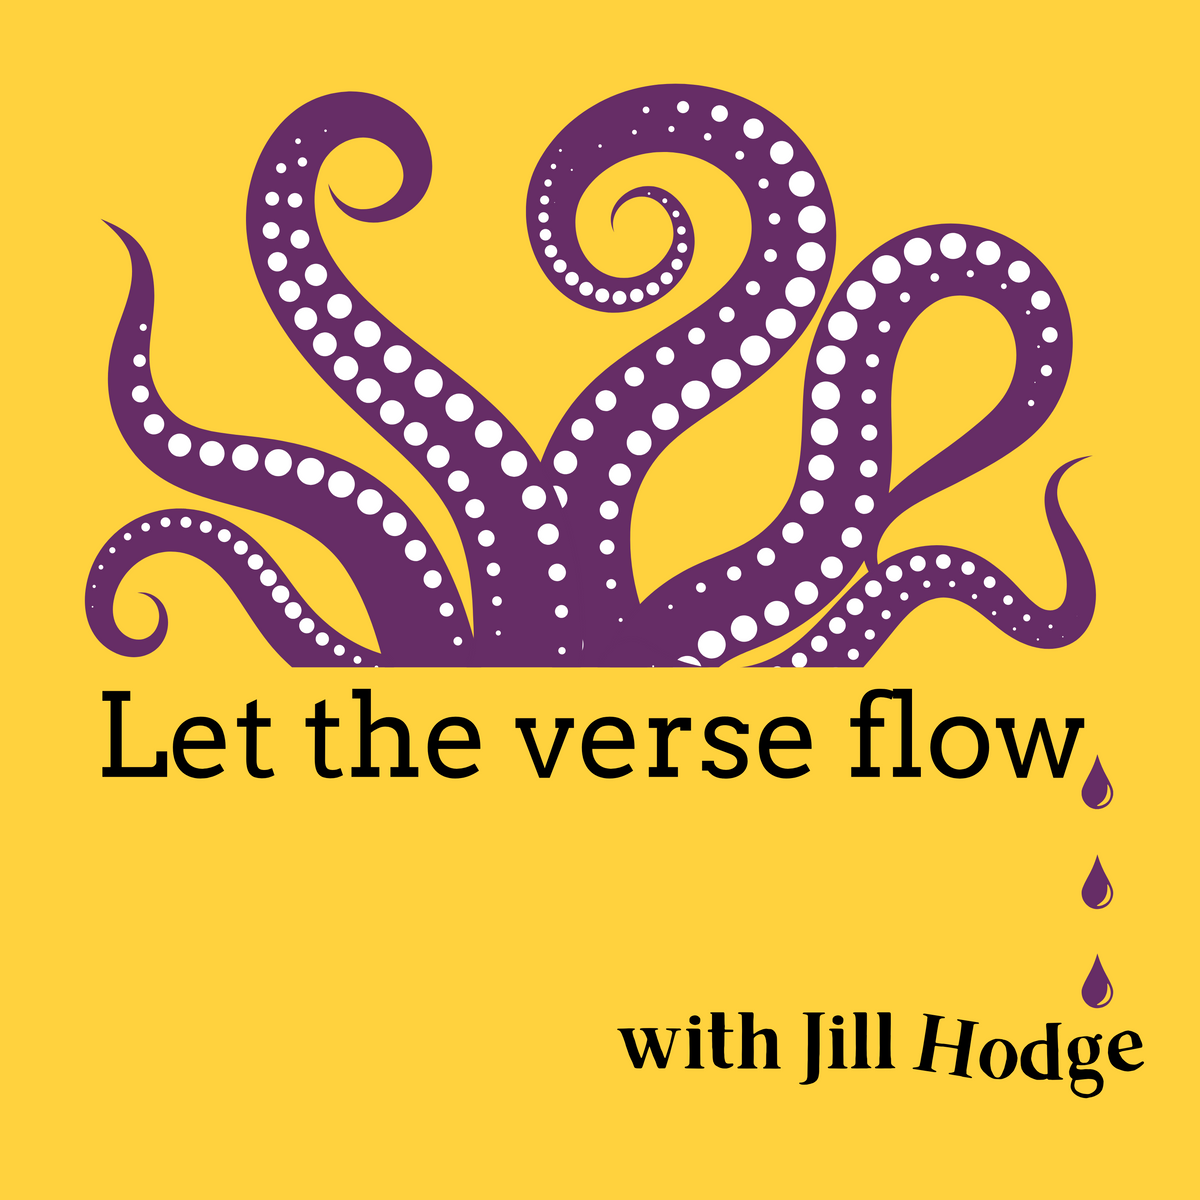 Cover Art for the Let the Verse Flow podcast -- orange background with a purple octopus tentacle graphic and drops of ink